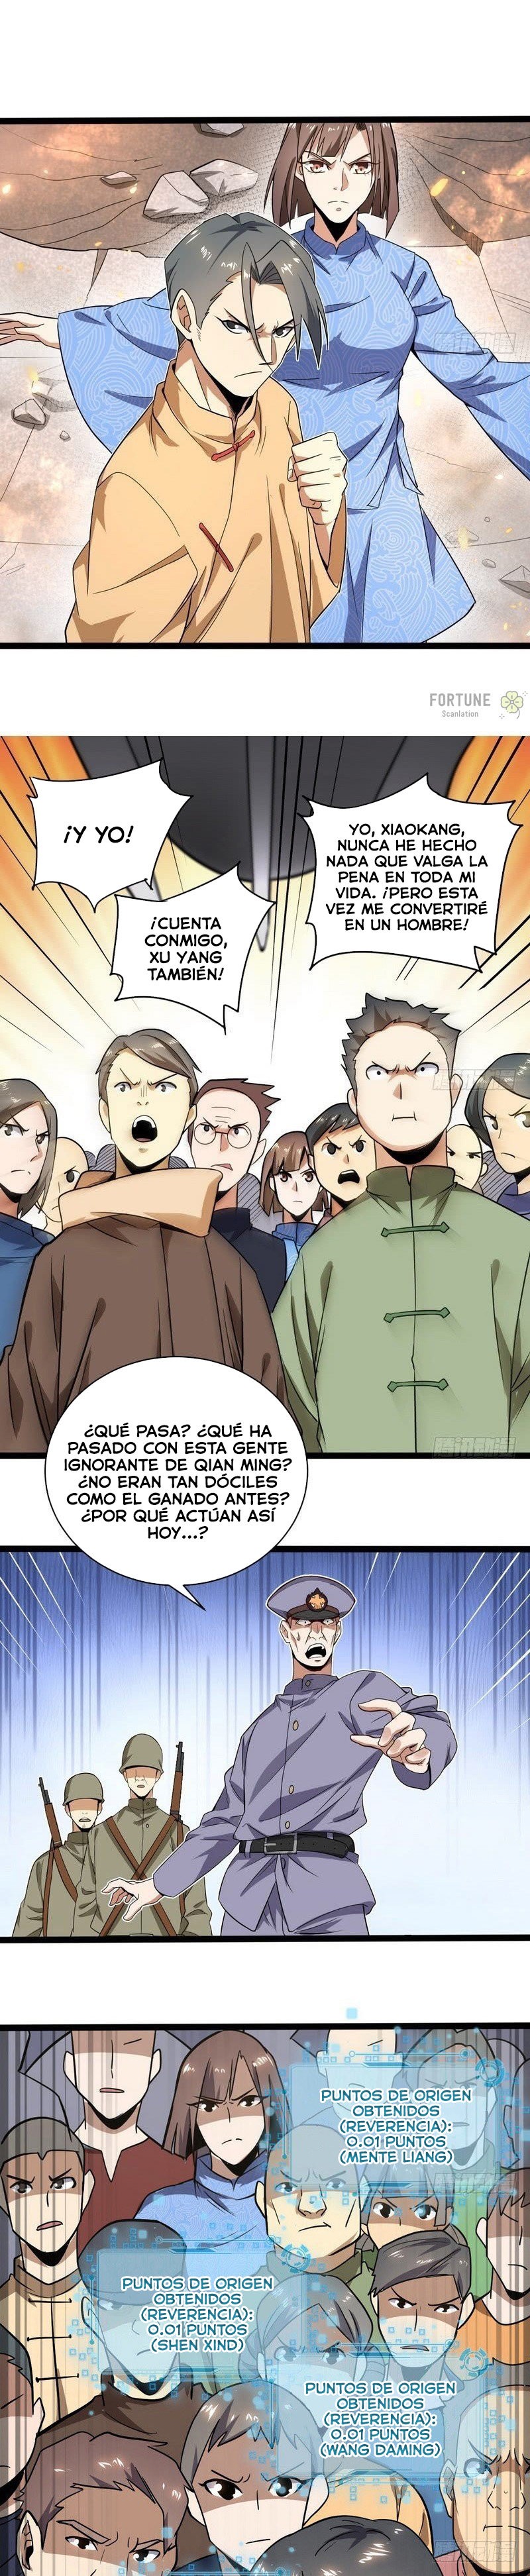 Manga Soy un dios maligno Chapter 20 image number 6